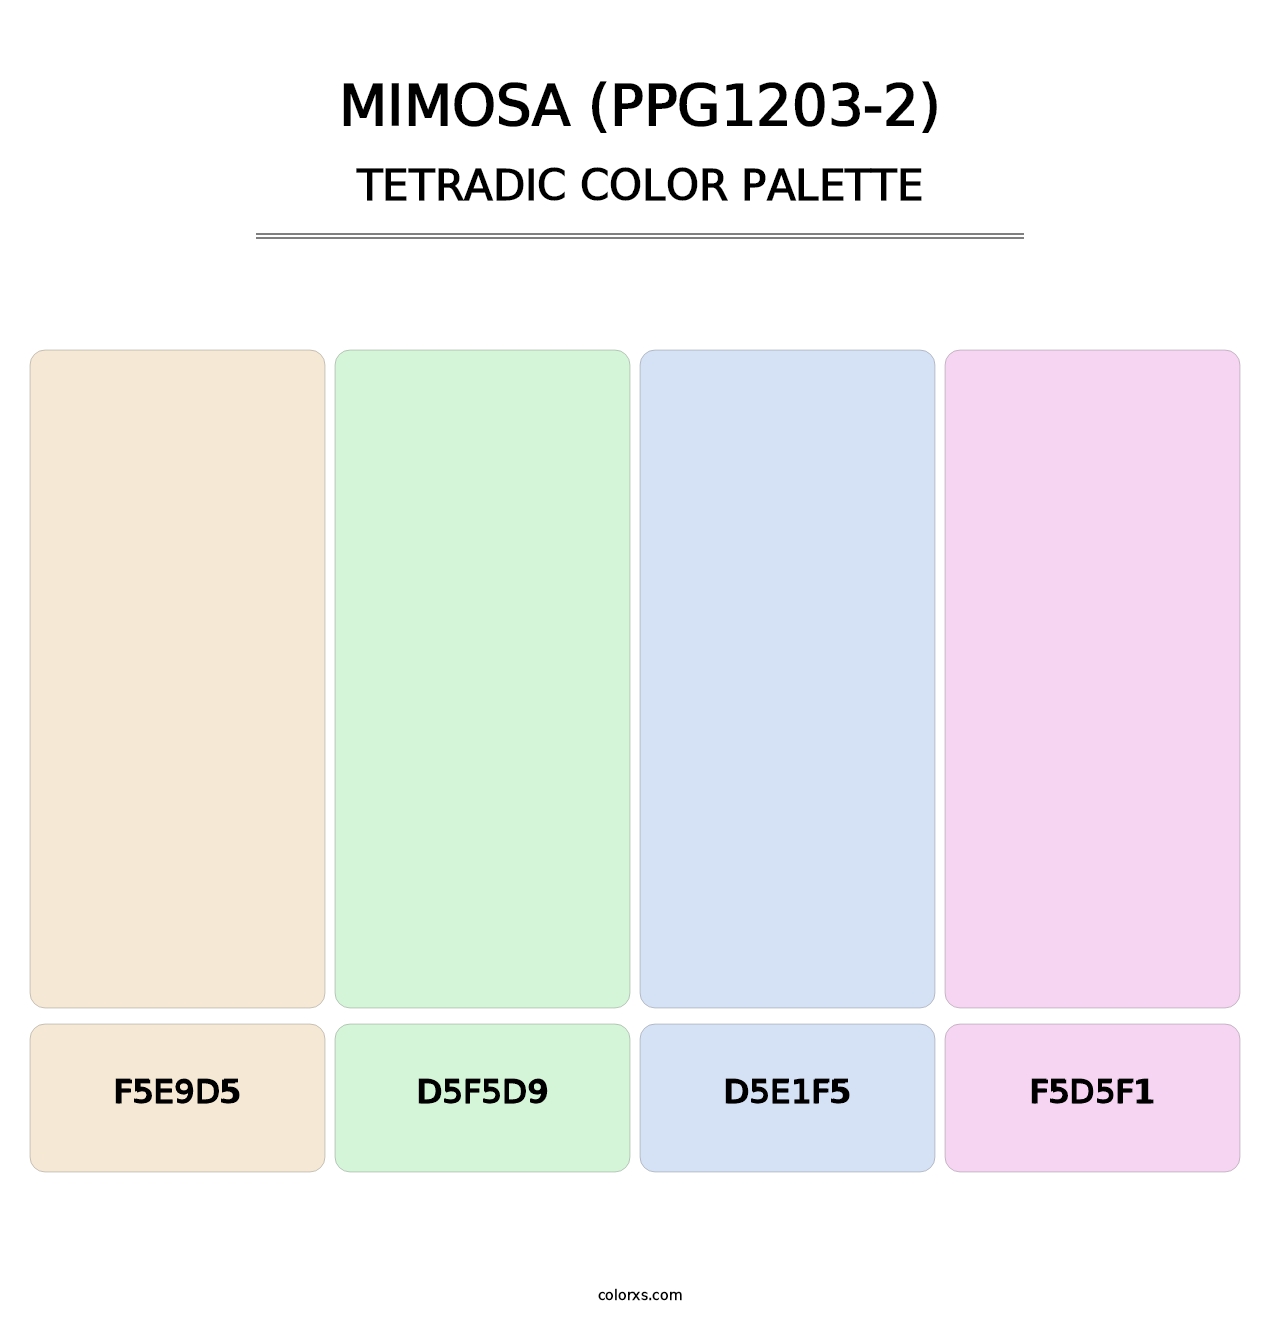 Mimosa (PPG1203-2) - Tetradic Color Palette